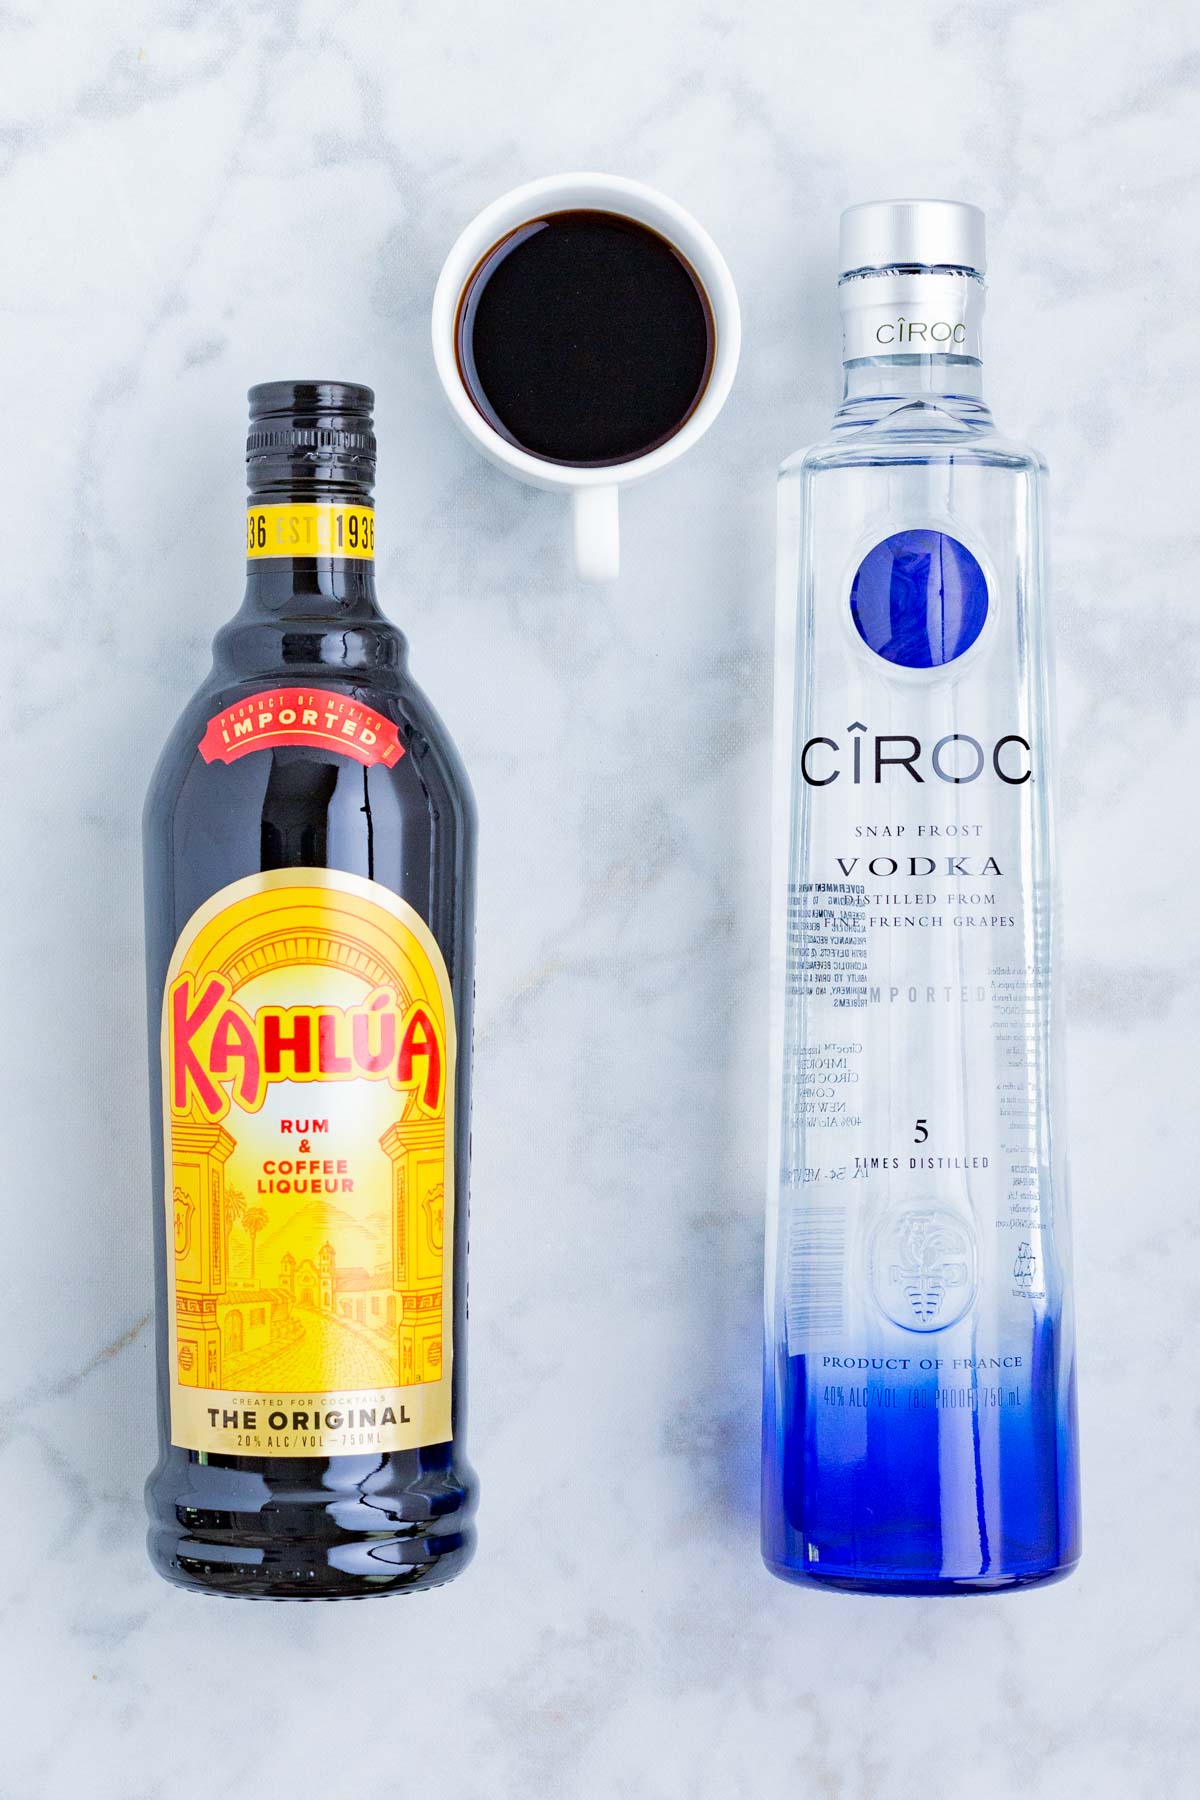 Vodka, coffee, and Kahlua are the ingredients for this drink.